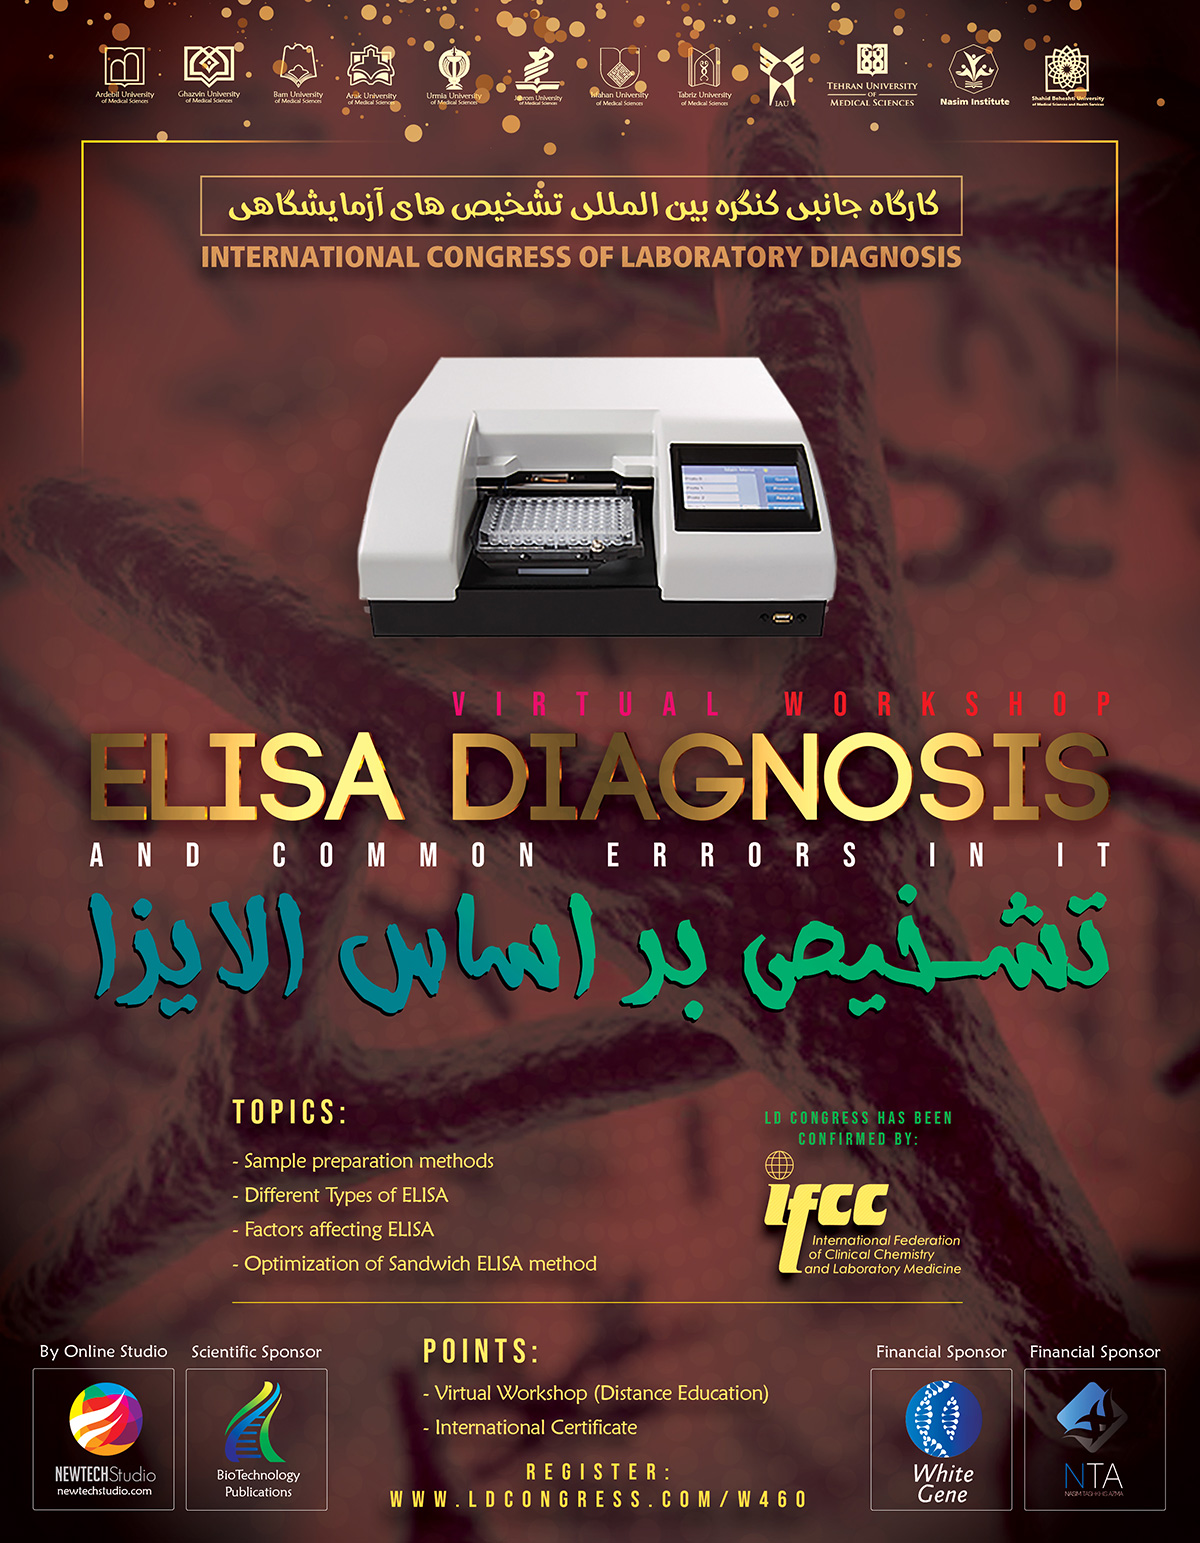 Overview of Elisa-based diagnostic methods and troubleshooting guide